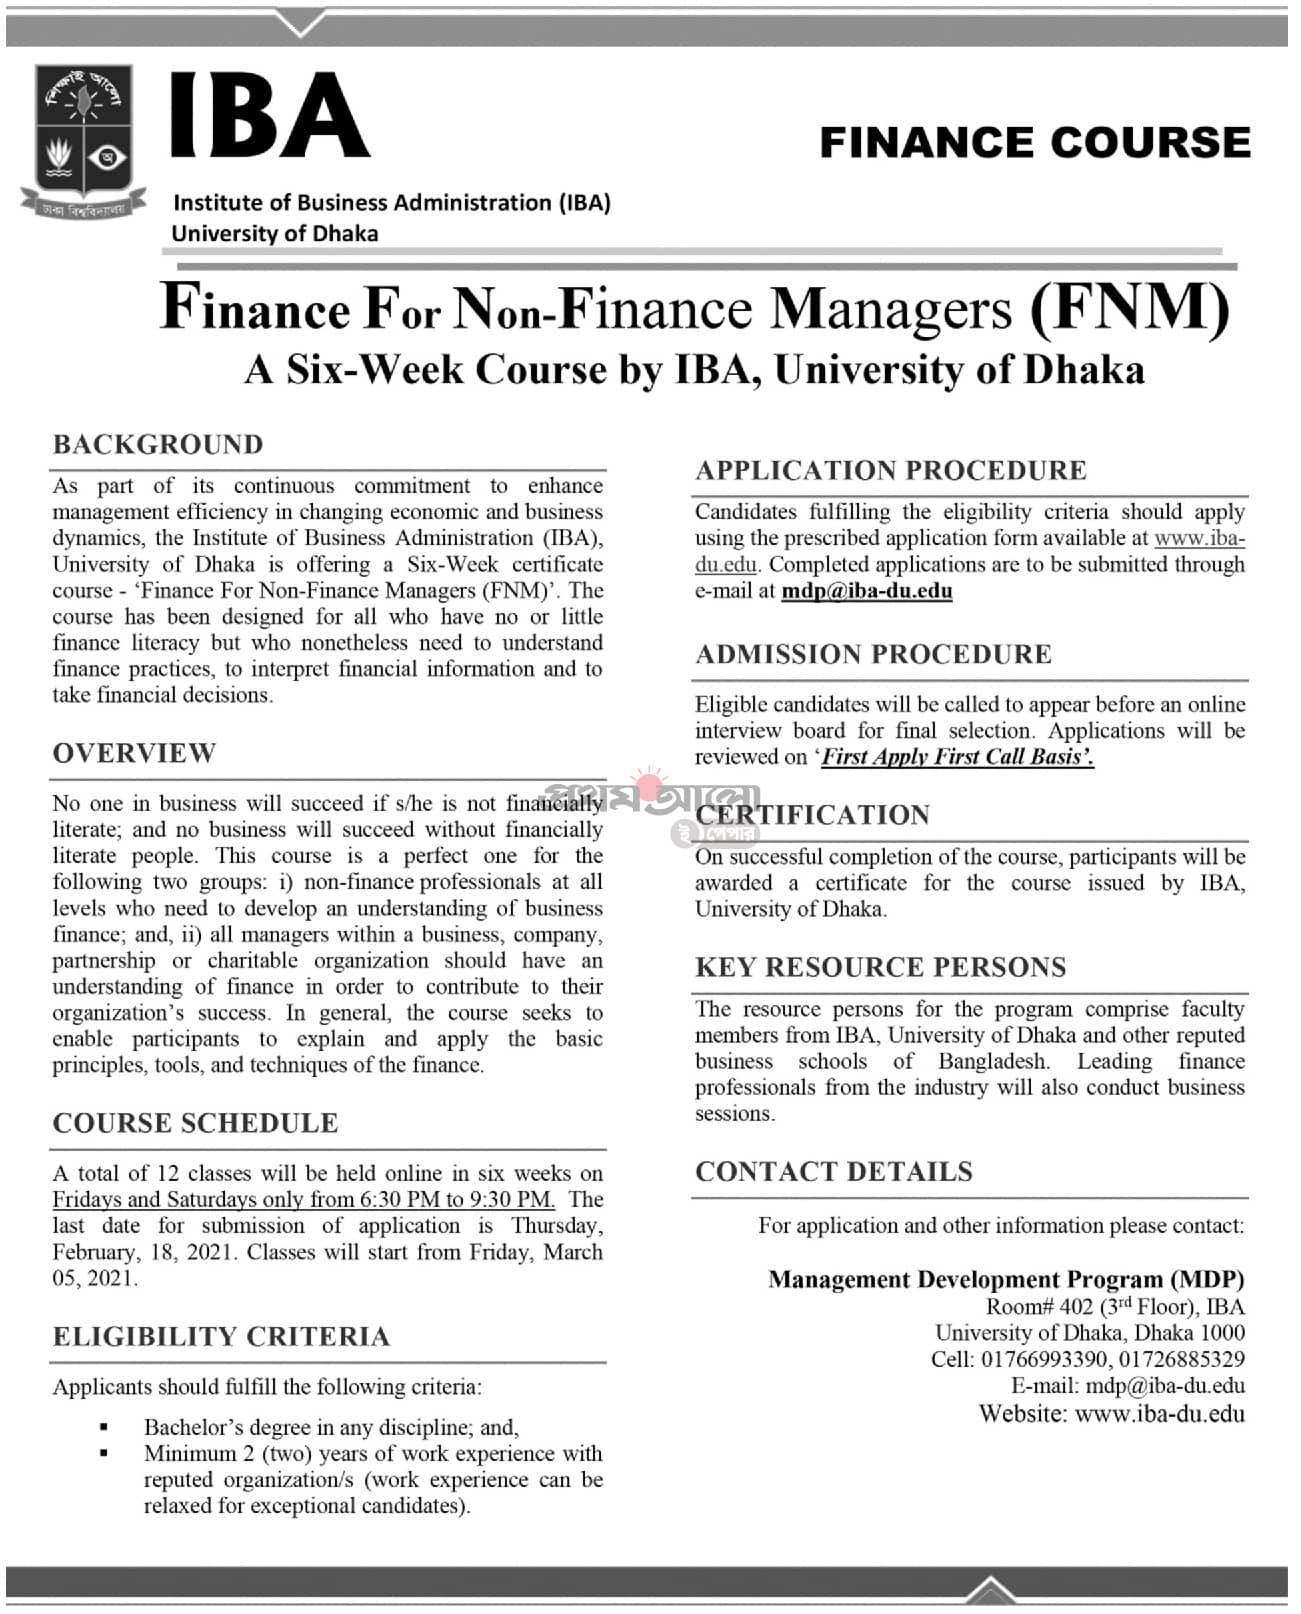 Finance for Non-Finance Managers | IBA course in Bangladesh